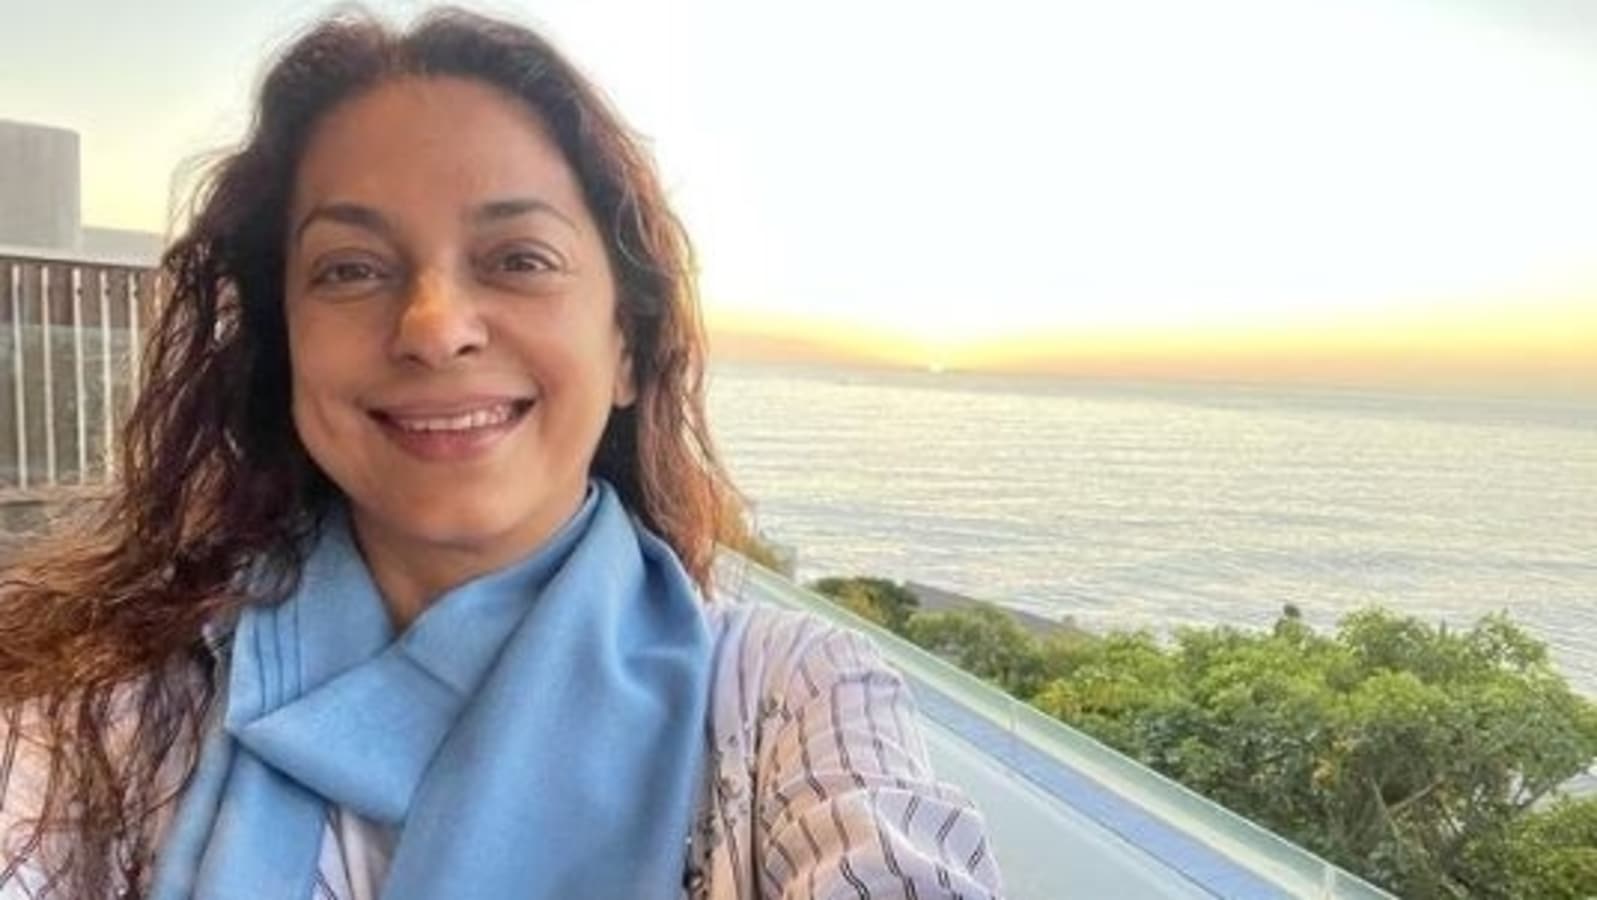 Juhi Chawla Shares A Candid Selfie With The Setting Sun In The